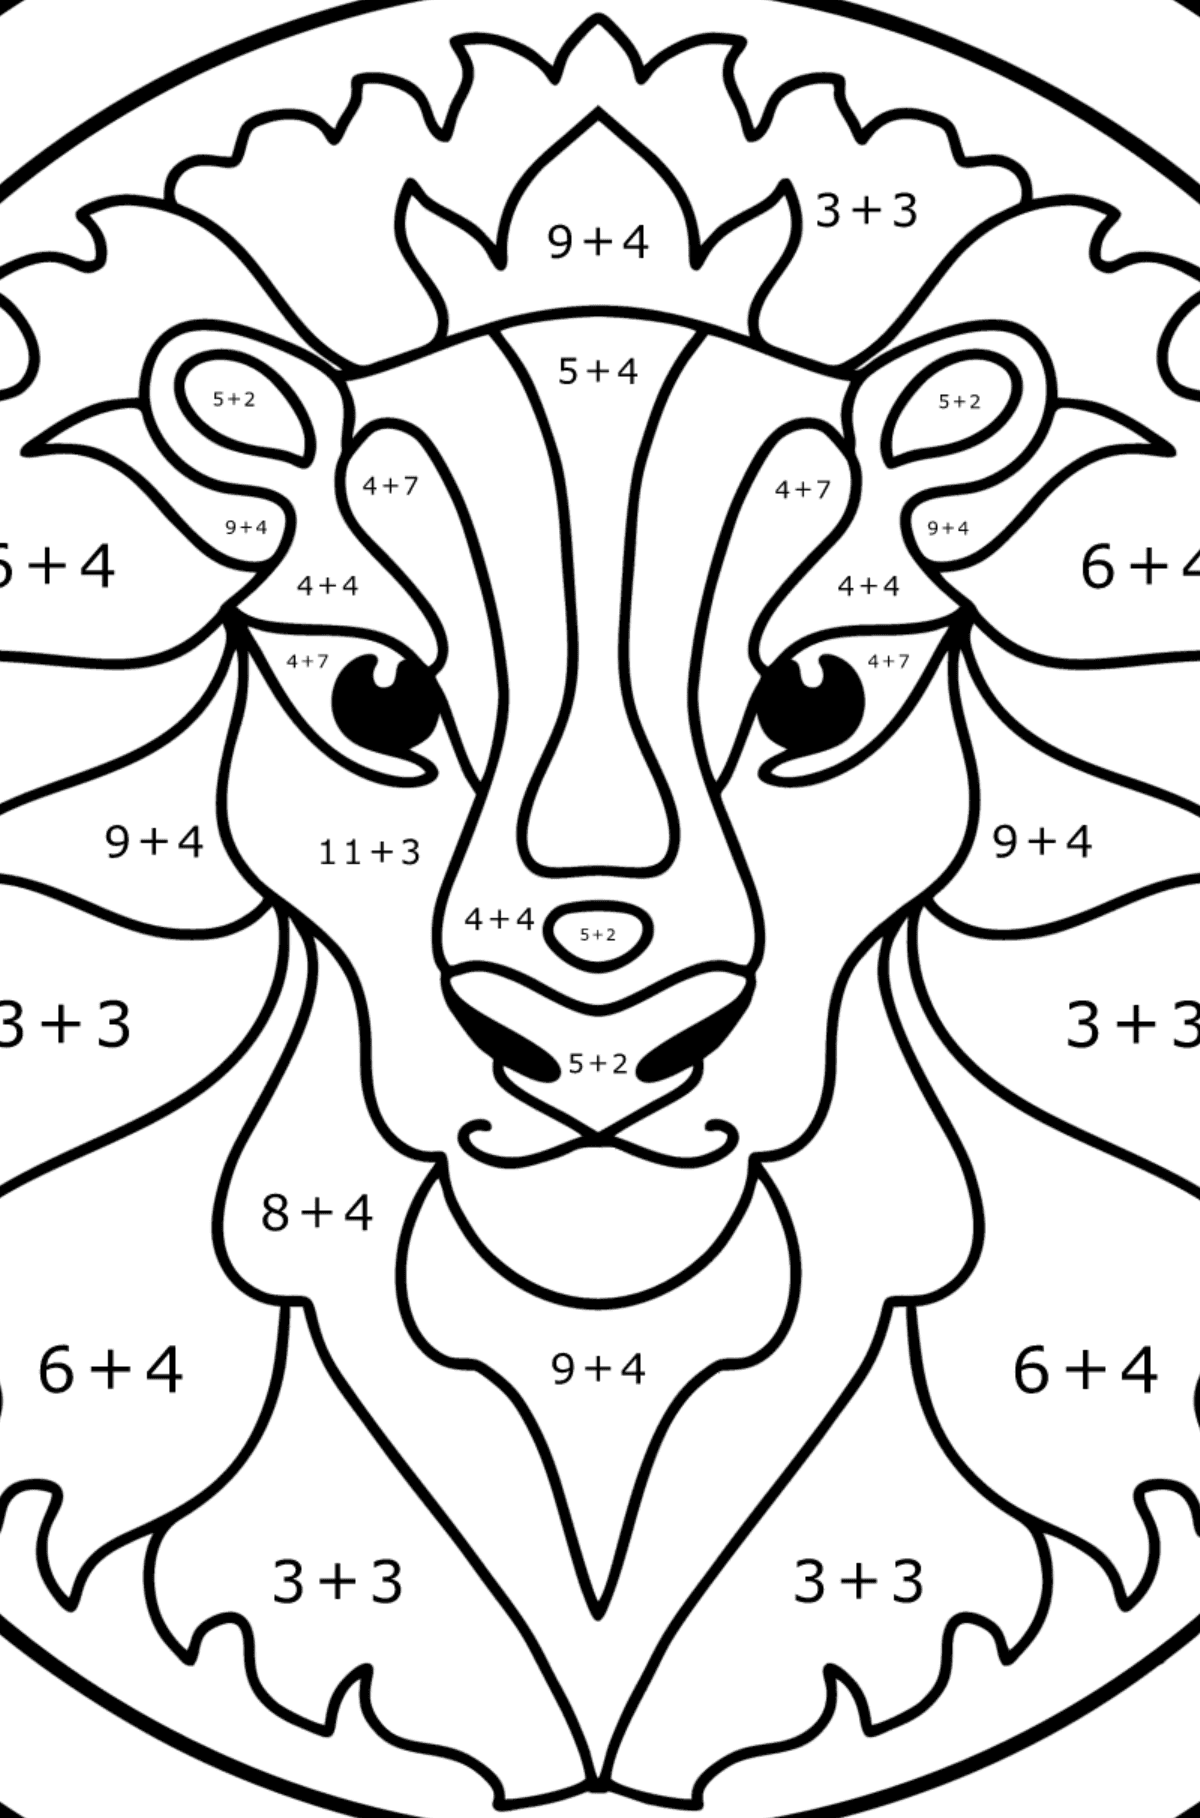 Coloring page for kids - zodiac sign Leo - Math Coloring - Addition for Kids